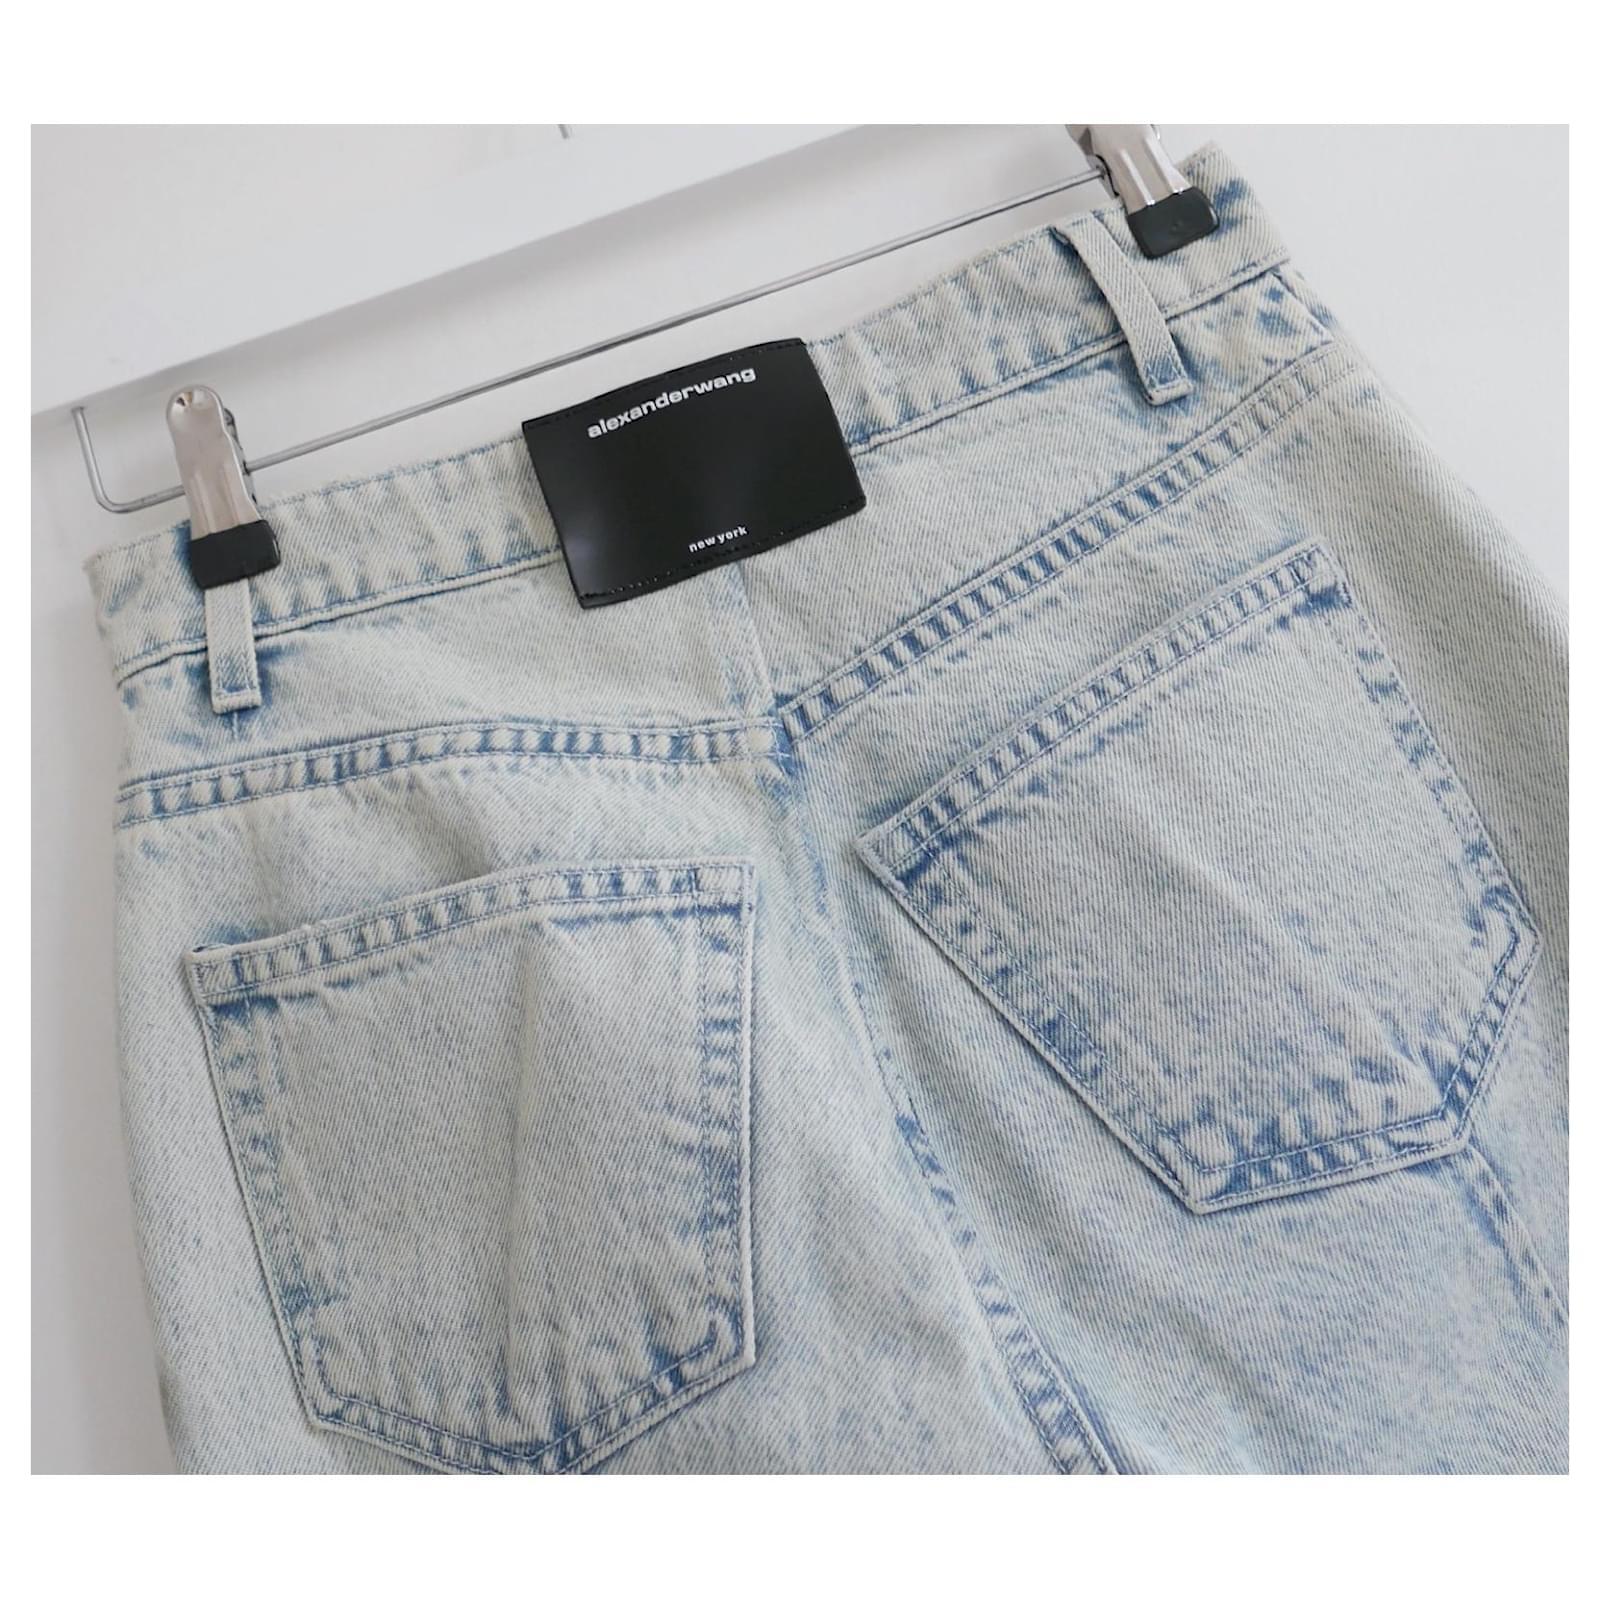 Alexander Wang Cropped Paint Hem Jeans In Excellent Condition For Sale In London, GB